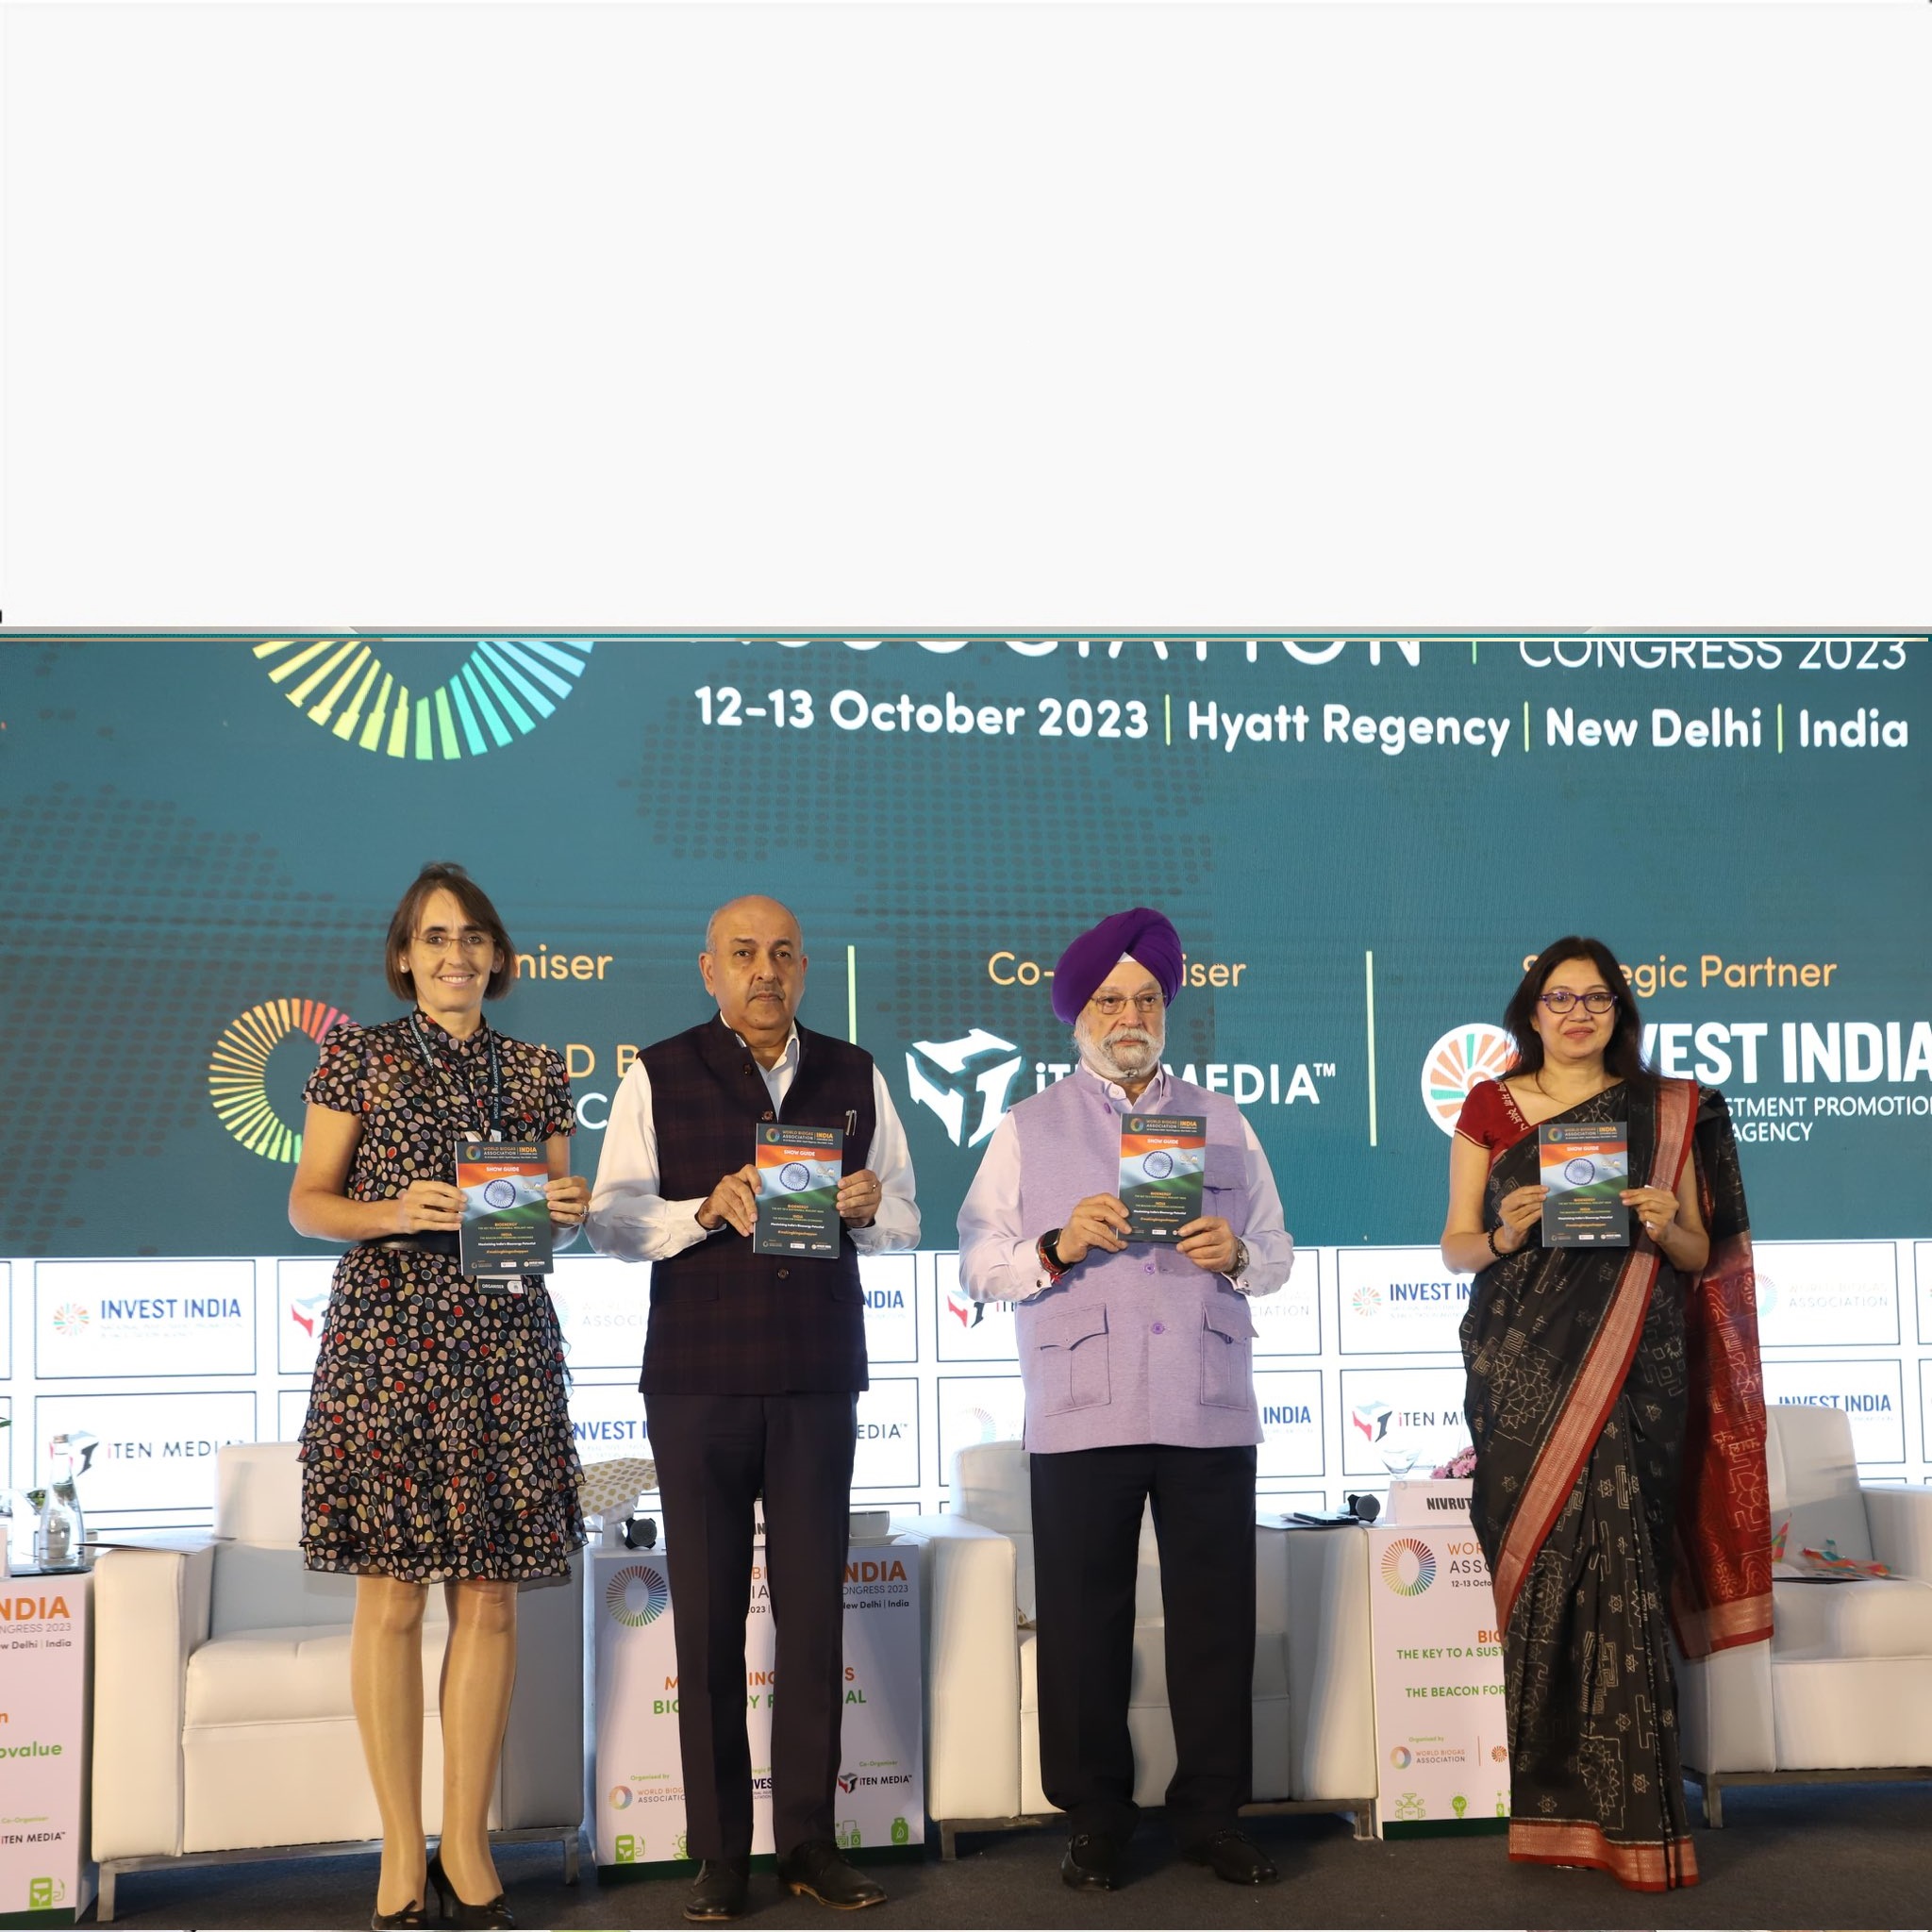  Global Biogas sector at the Inaugural